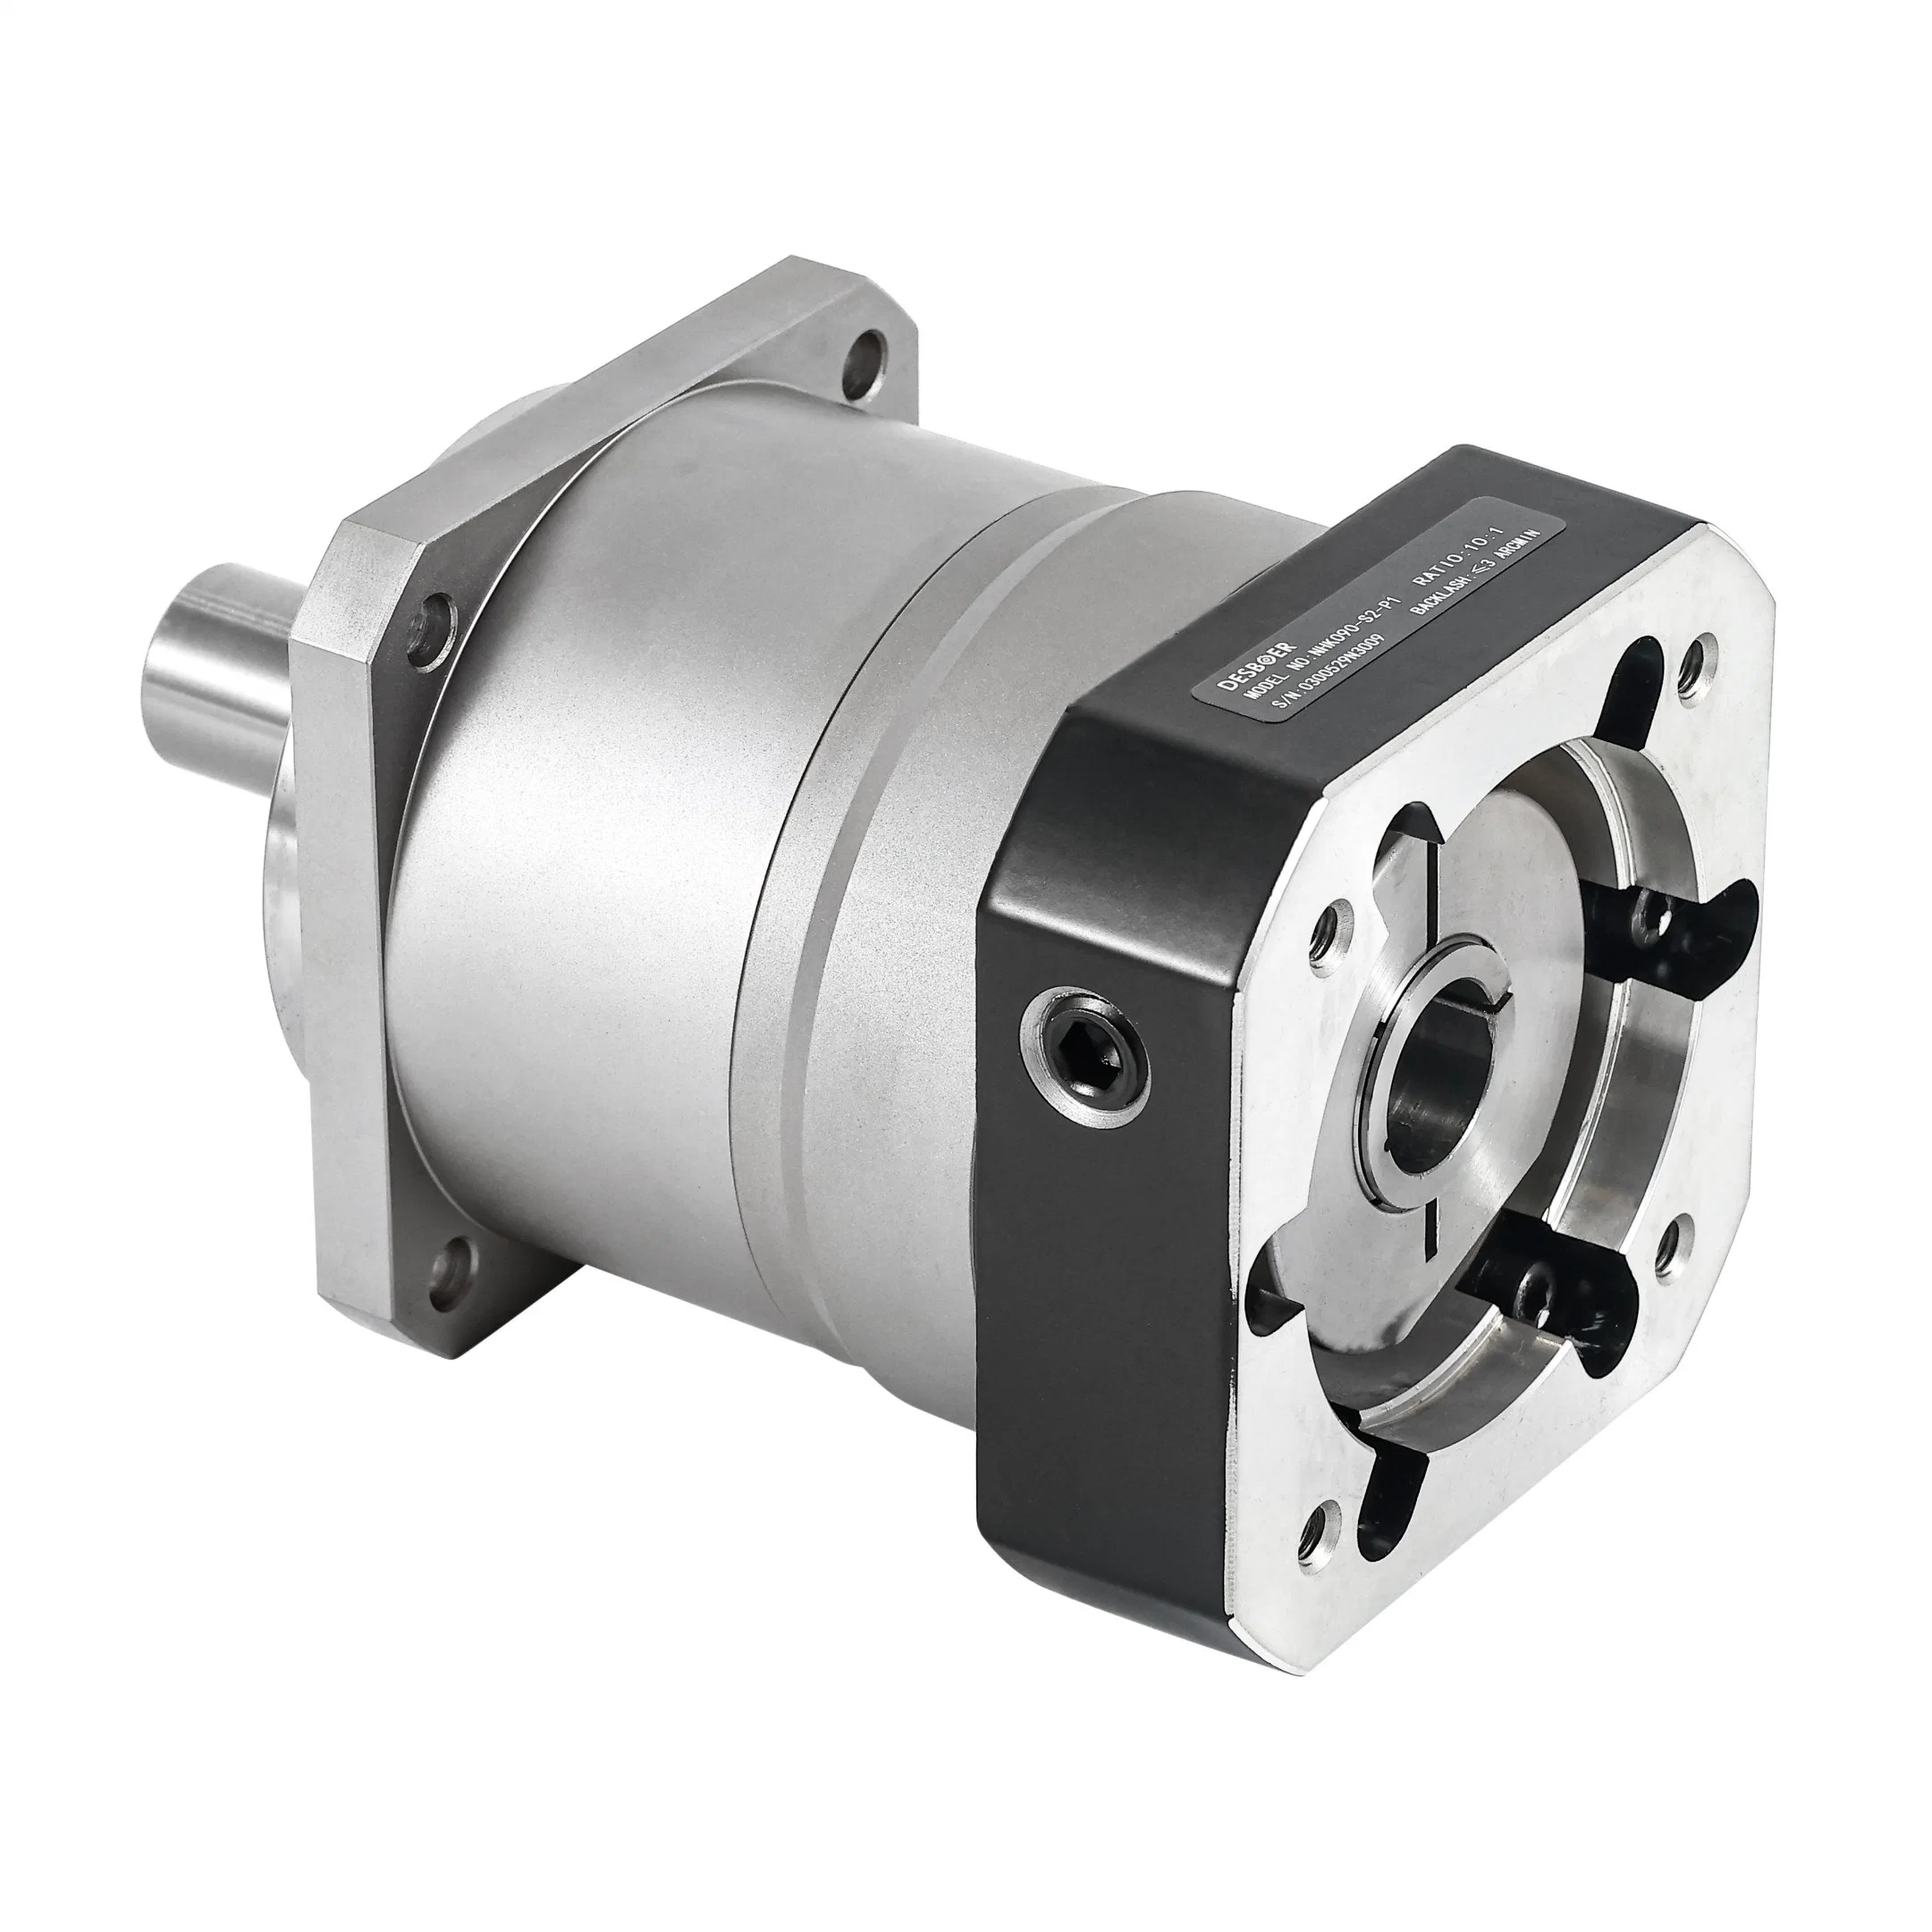 Nhk Economic Series 42mm Flange High Precision Low Noise Planetary Gearbox Used in Delta Robots